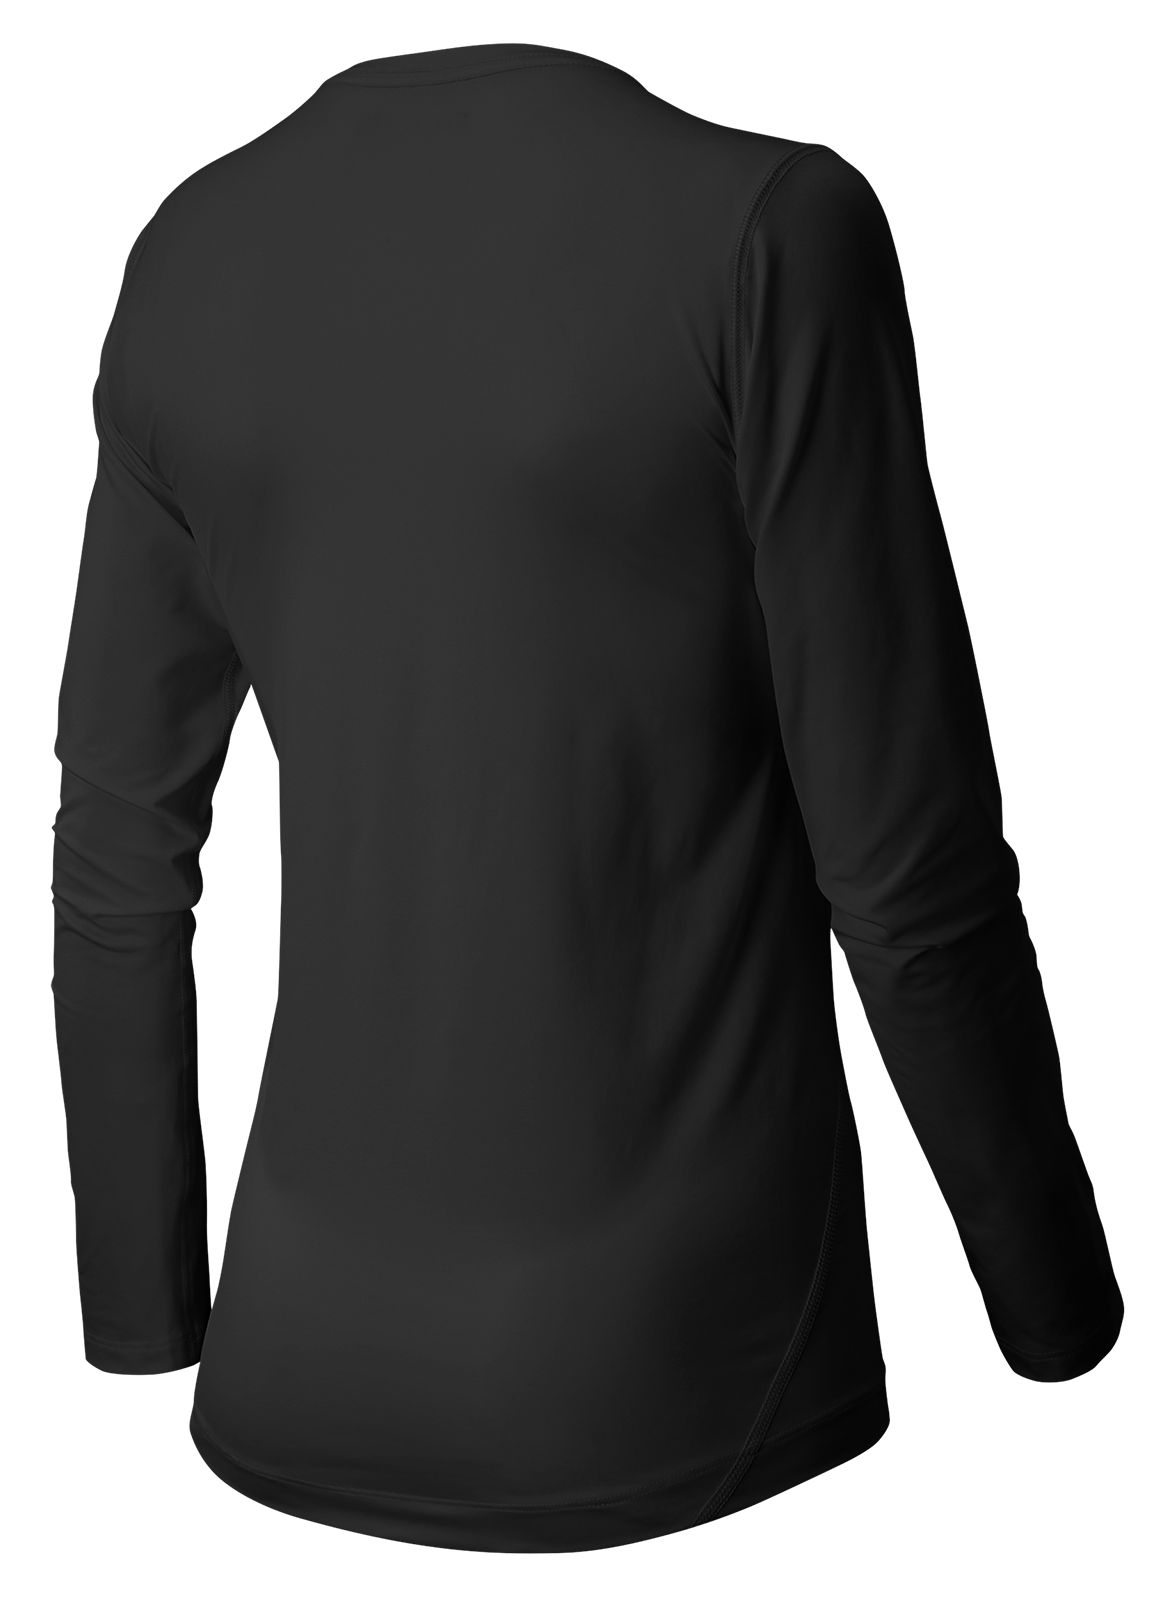 Women's NBW Long Sleeve Compression Top, Team Black image number 1